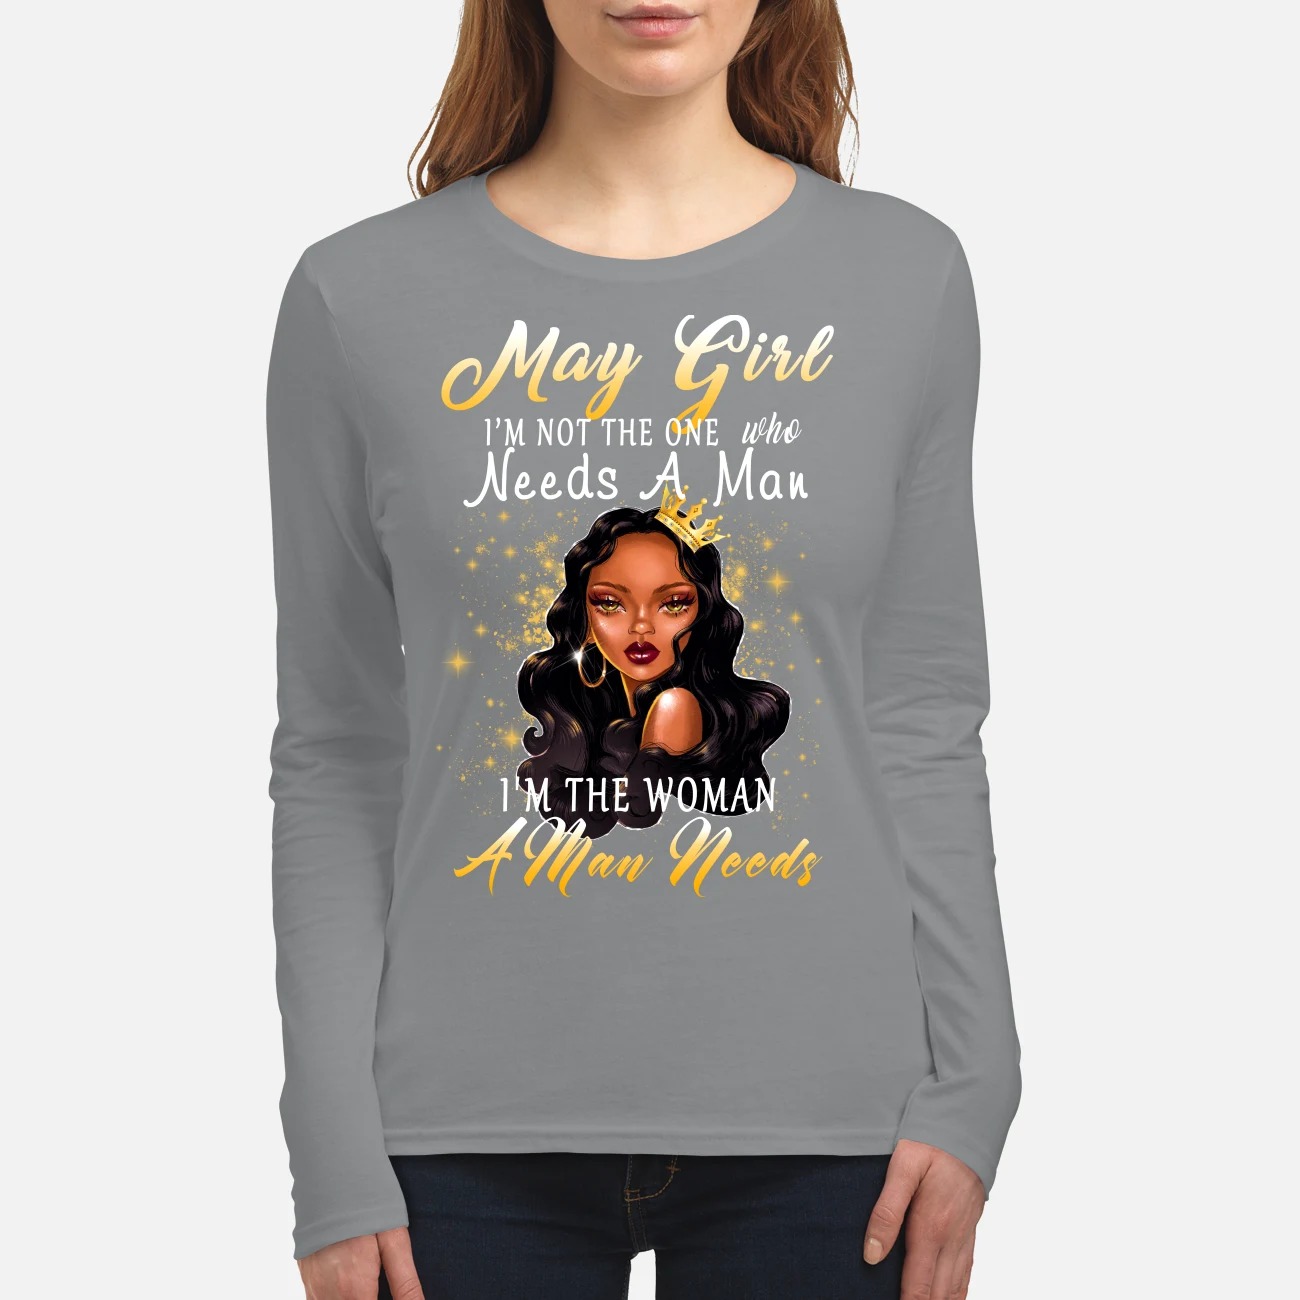 May girl I'm not the one who needs a man women's long sleeved shirt